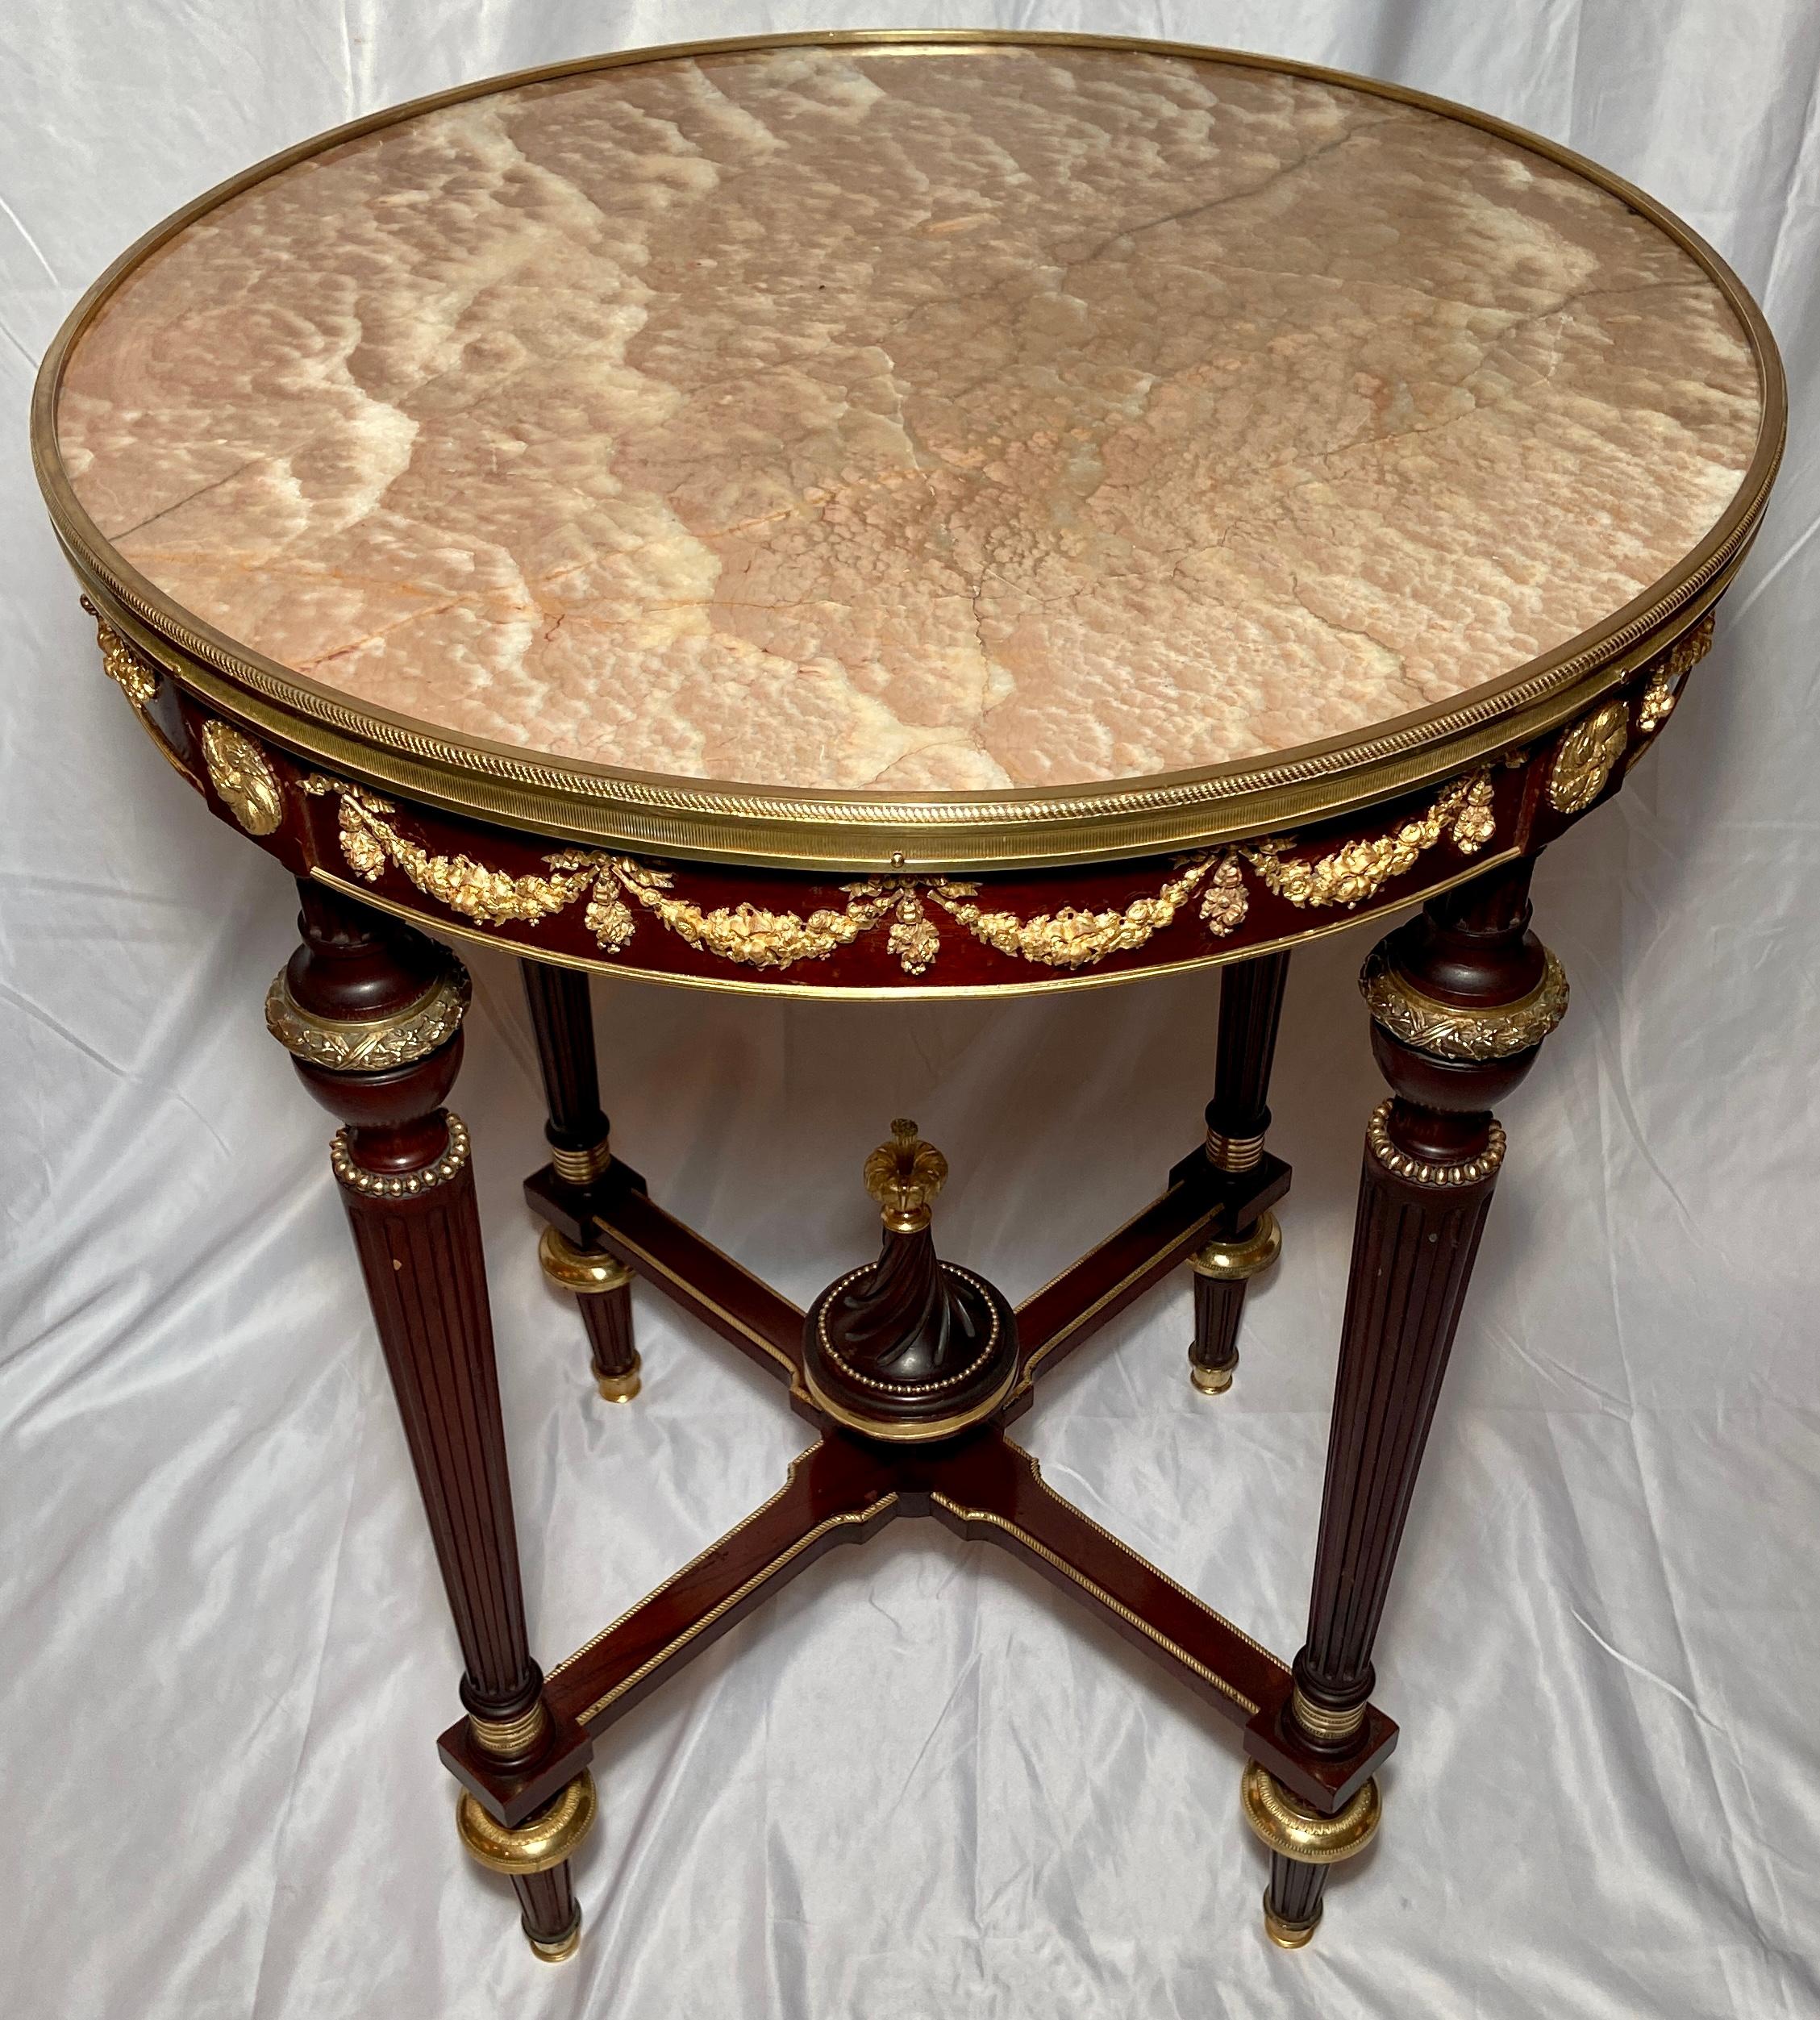 Antique French Mahogany and Bronze D'Ore Marble-Top Bouillotte Table, Circa 1880.